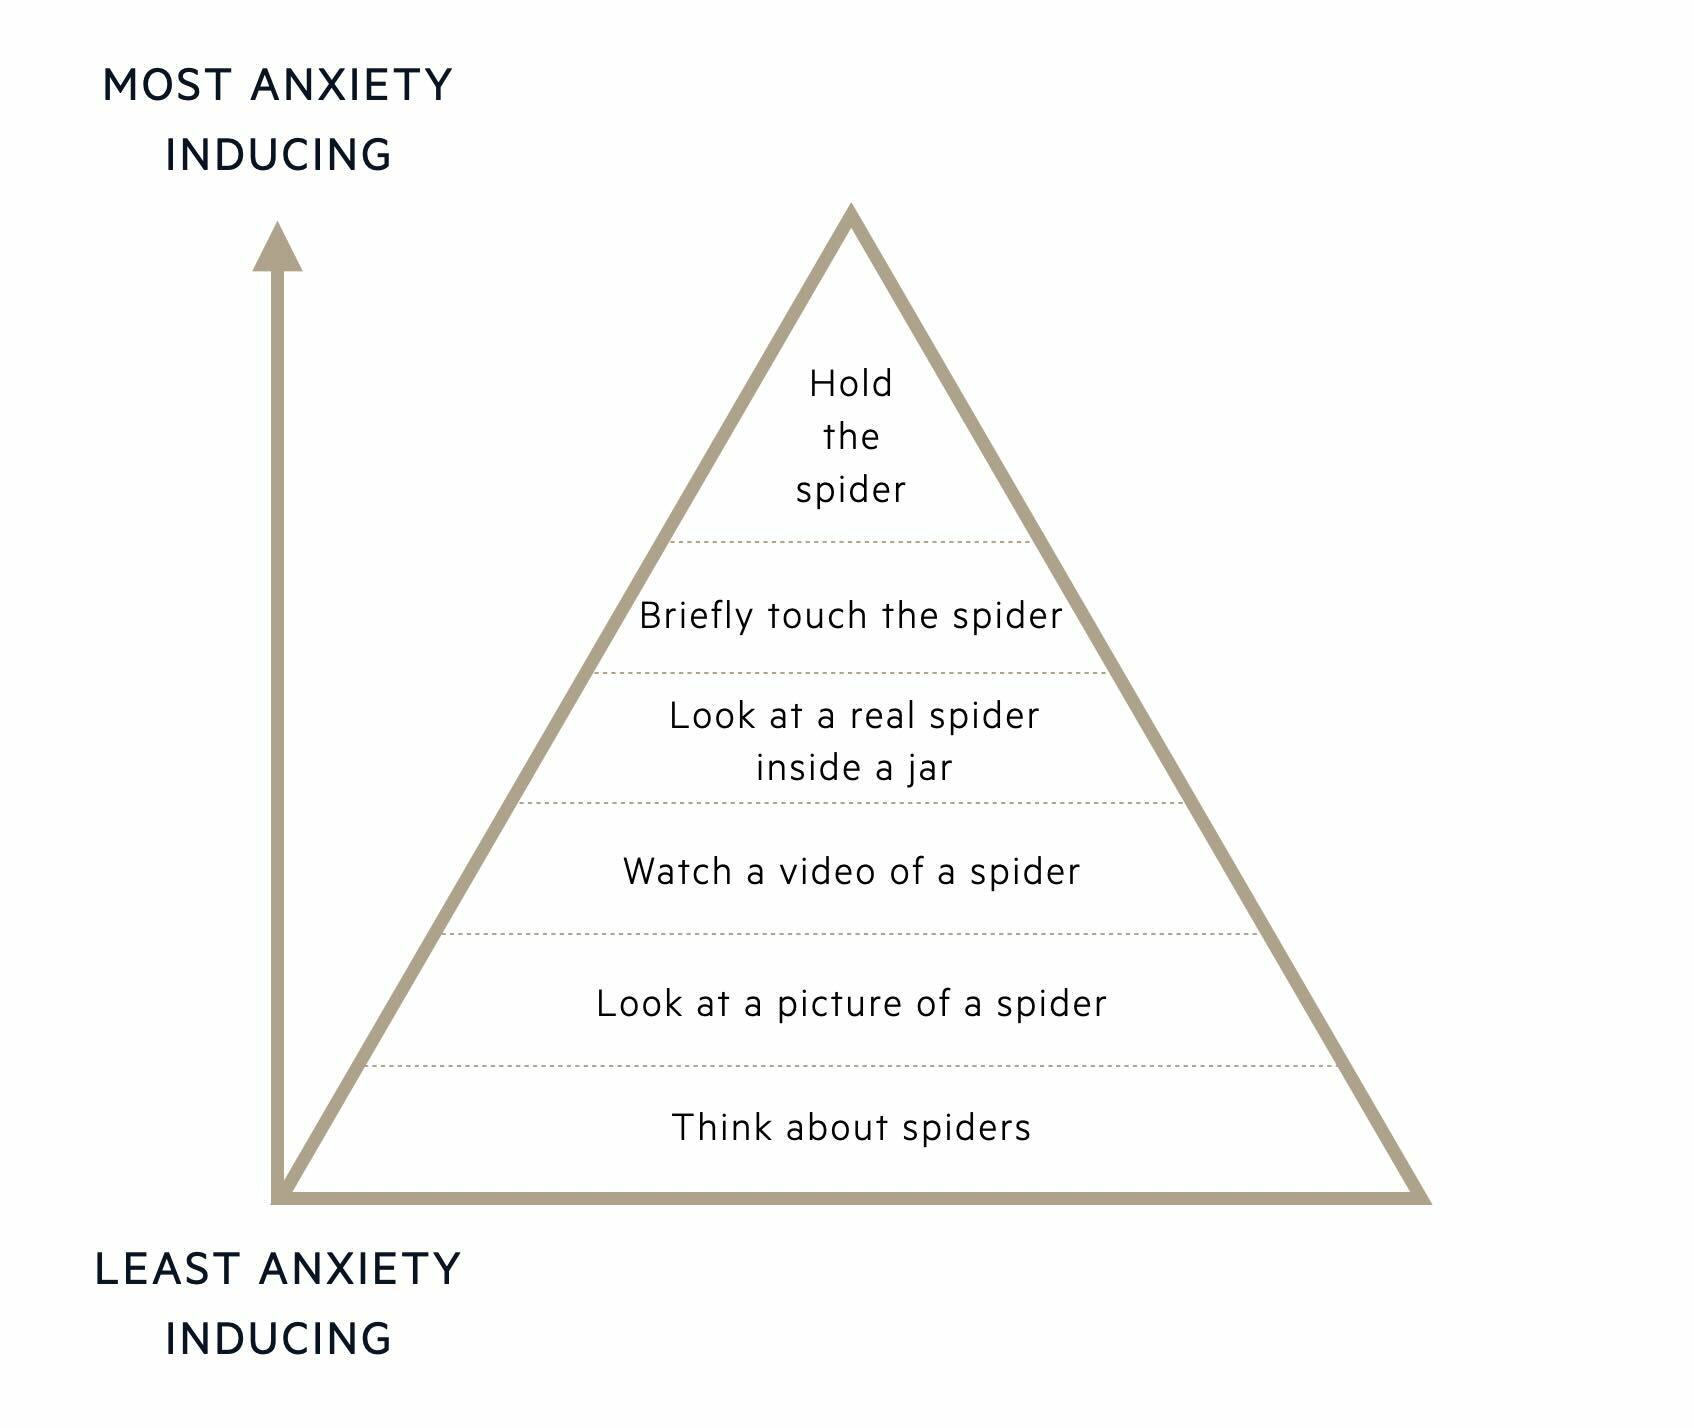 Anxiety hierarchy for a spider